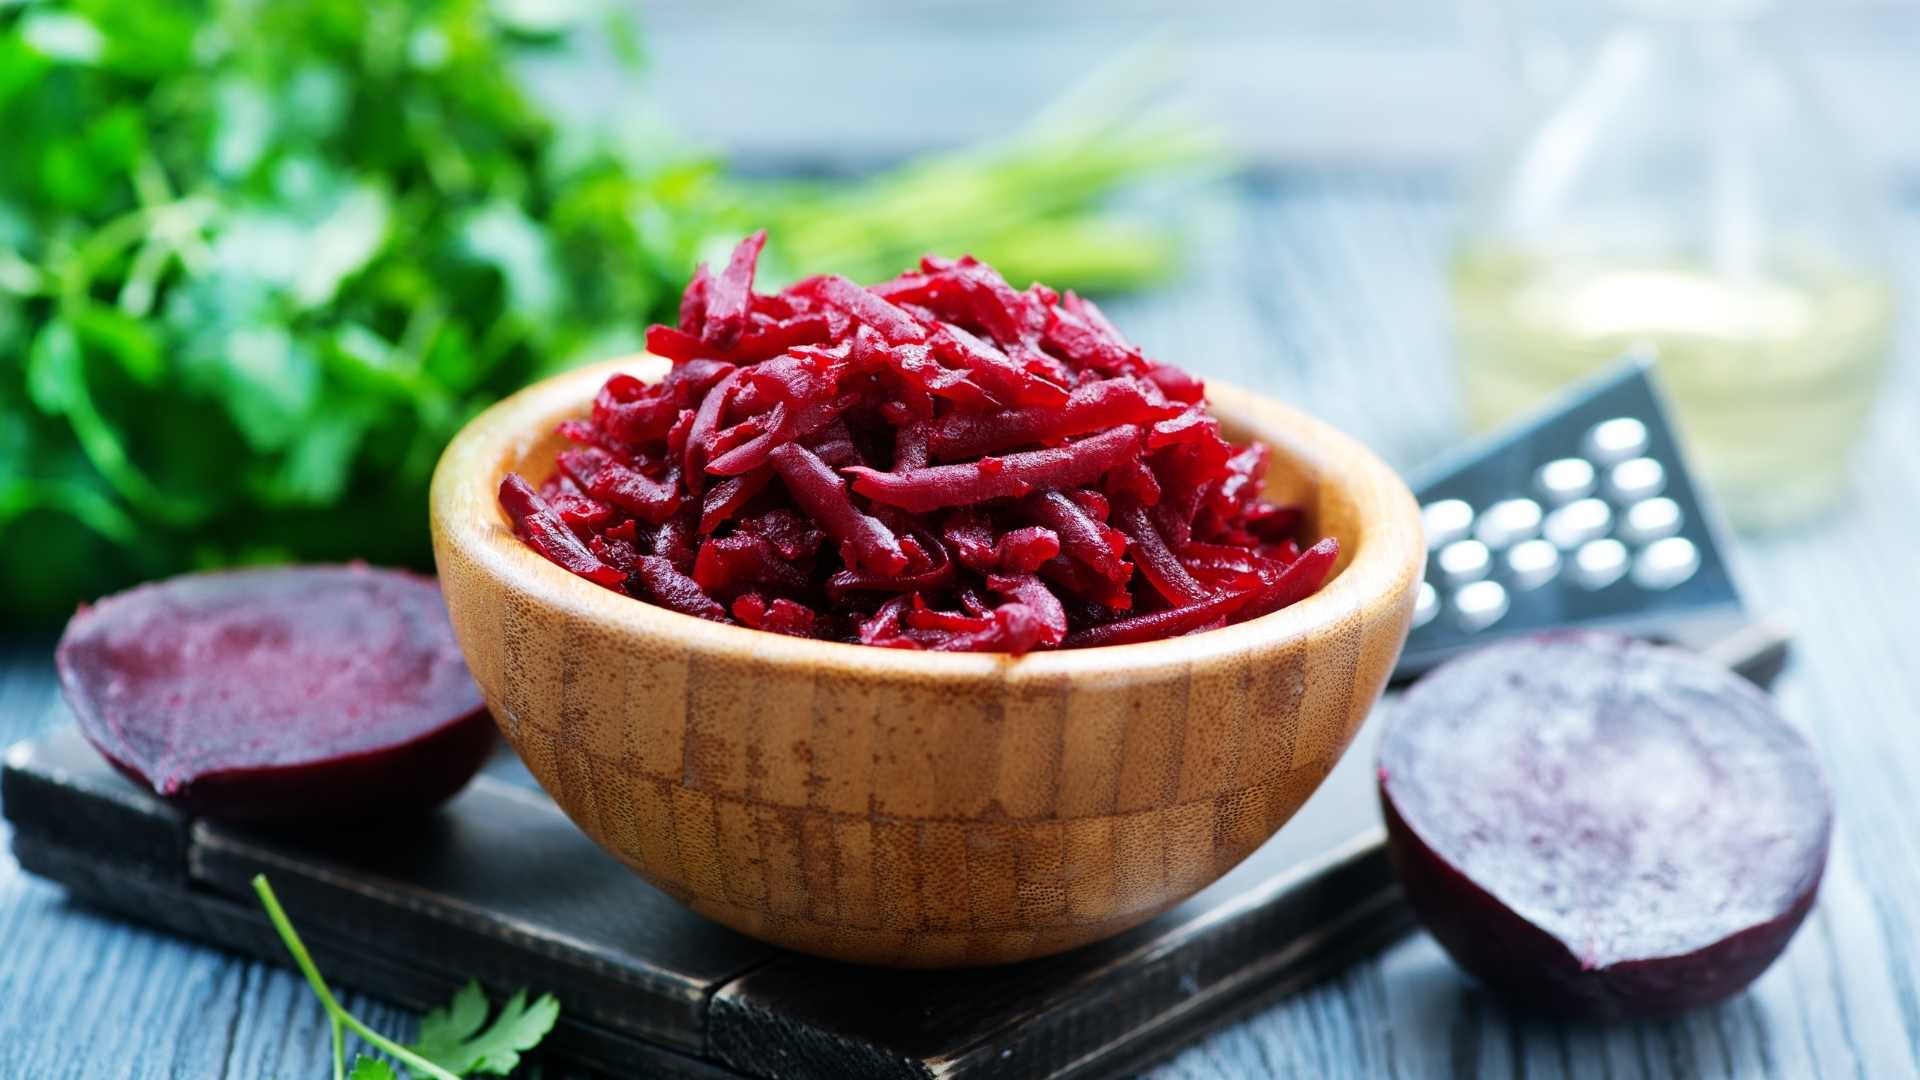 Get Your Daily Dose of Color with This Vibrant Beet Salad Recipe 2